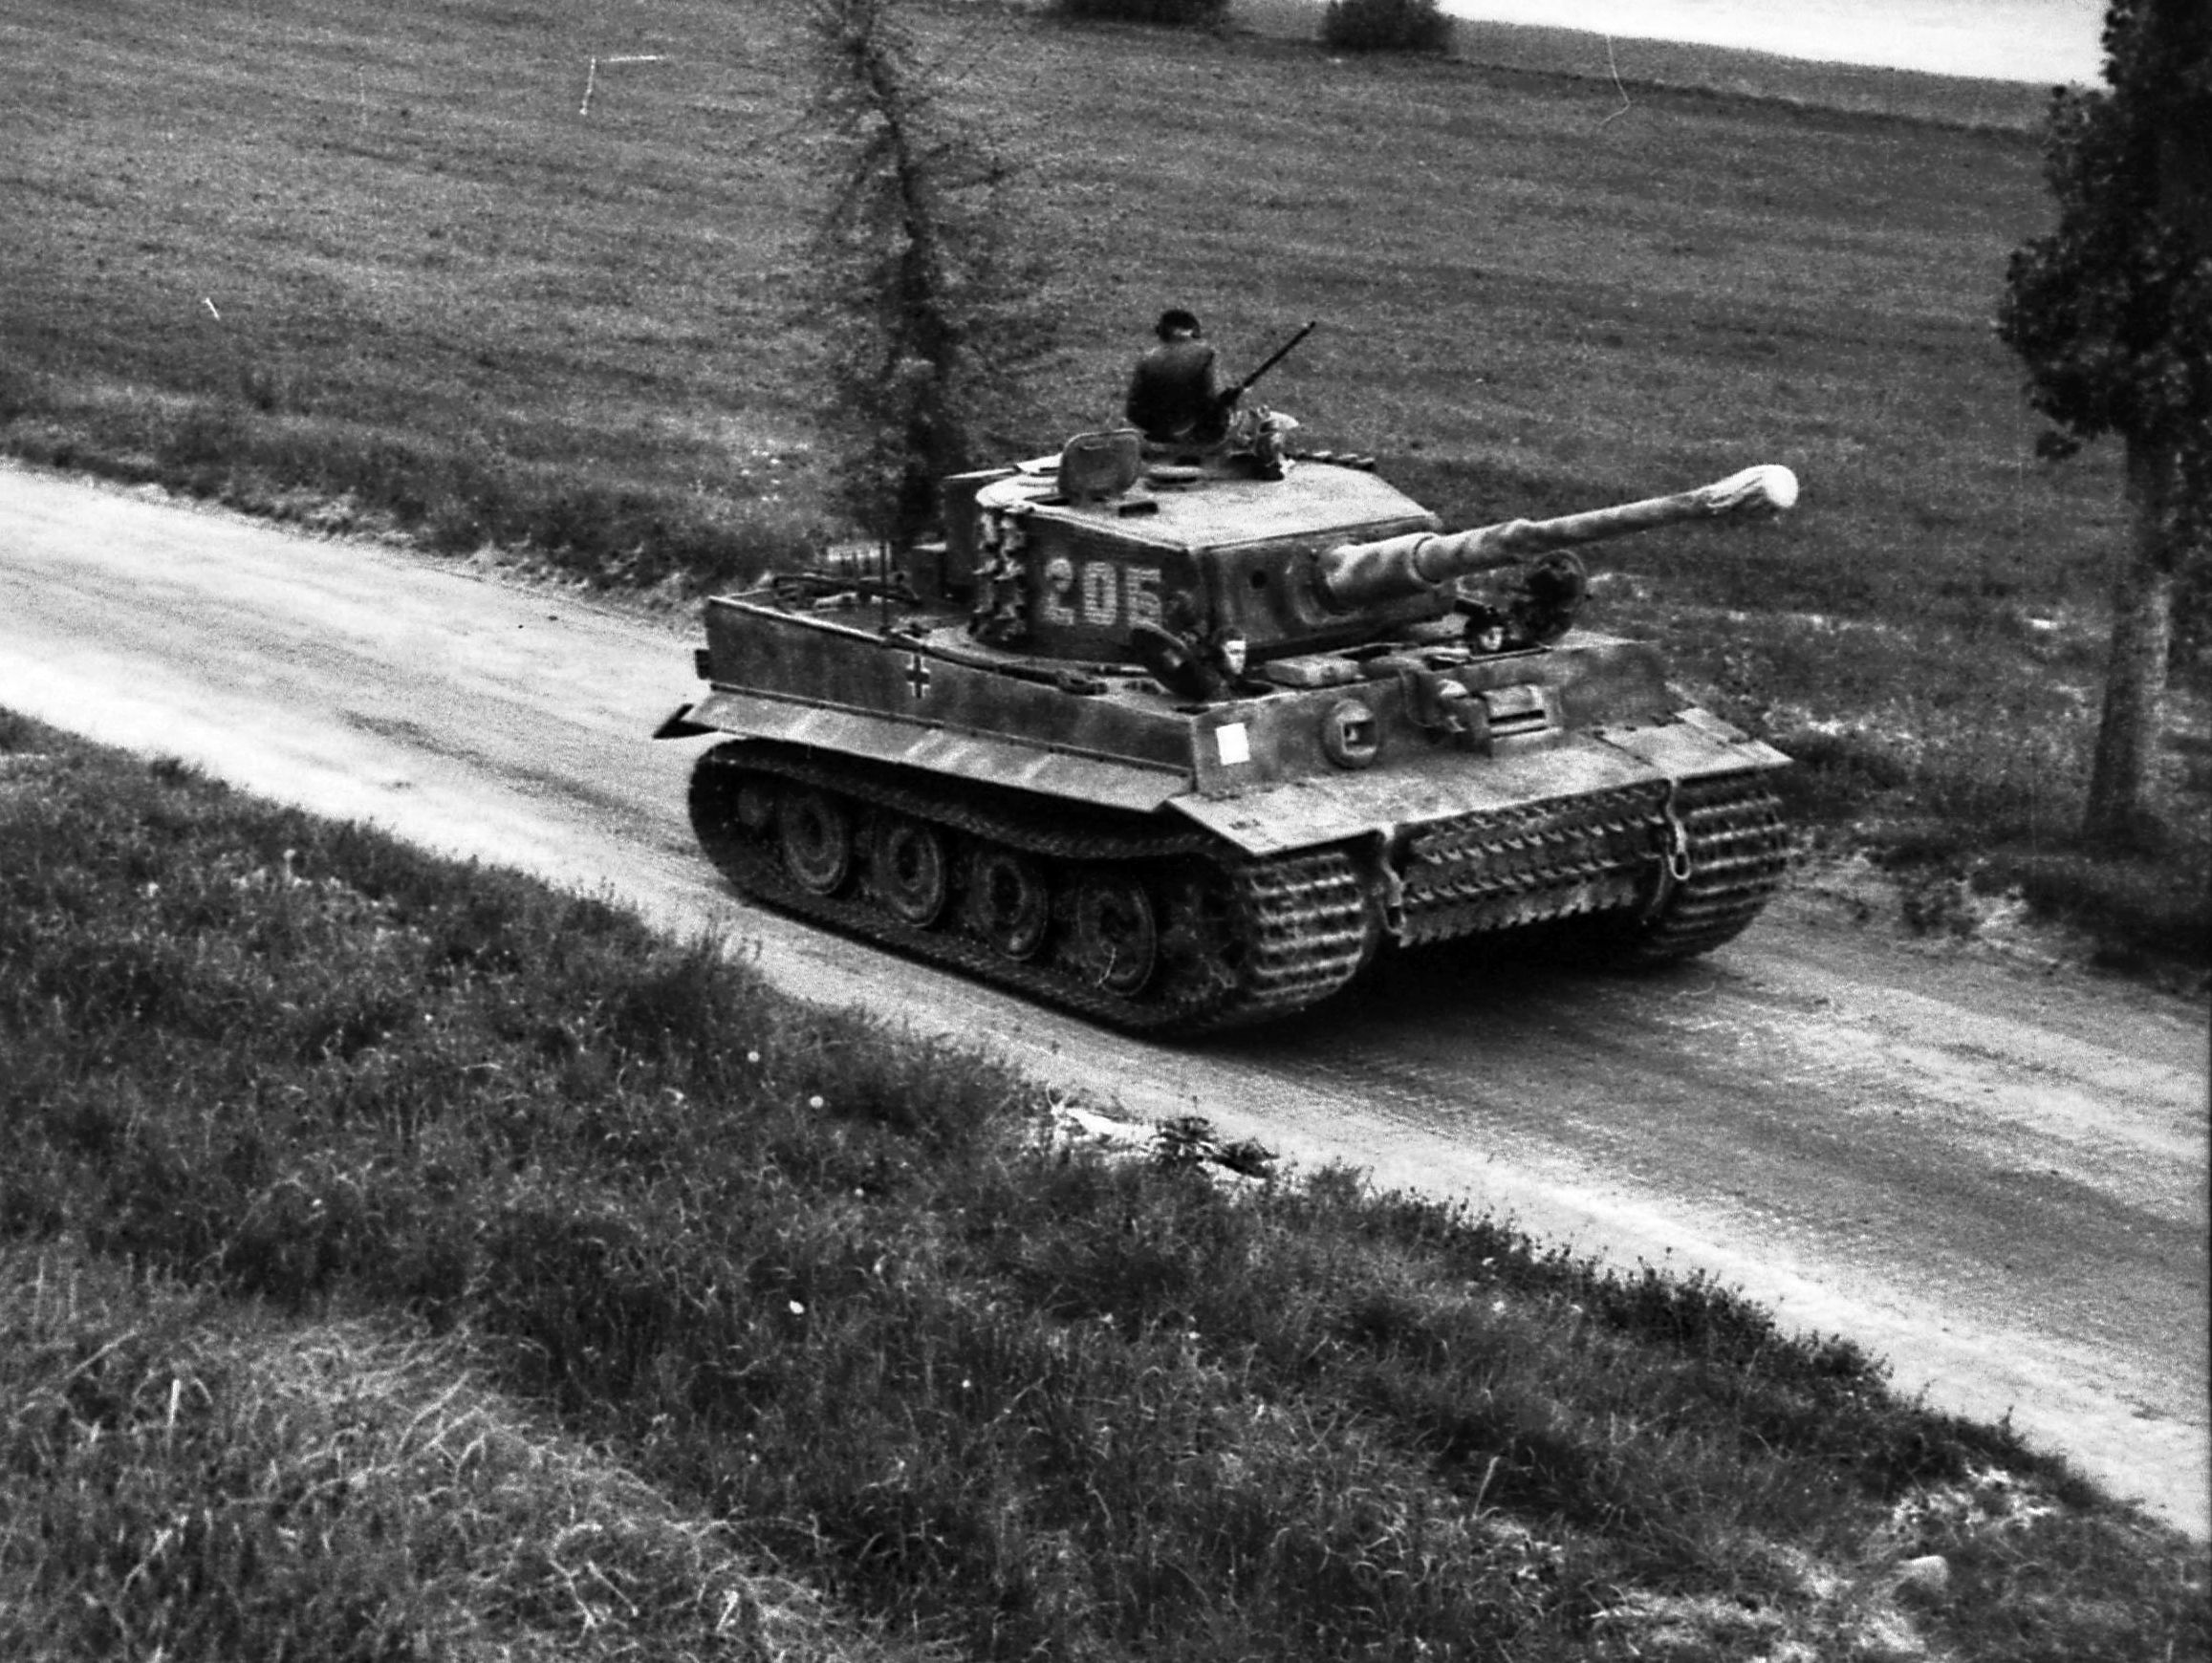 SS Lieutenant Michale Wittman’s Tiger tank, No. 205 , 2nd Company, 101st SS Heavy Tank Battalion, is shown advancing along a road in Normandy in early June, 1944. Wittman gained fame in the fighting at Villers-Bocage.